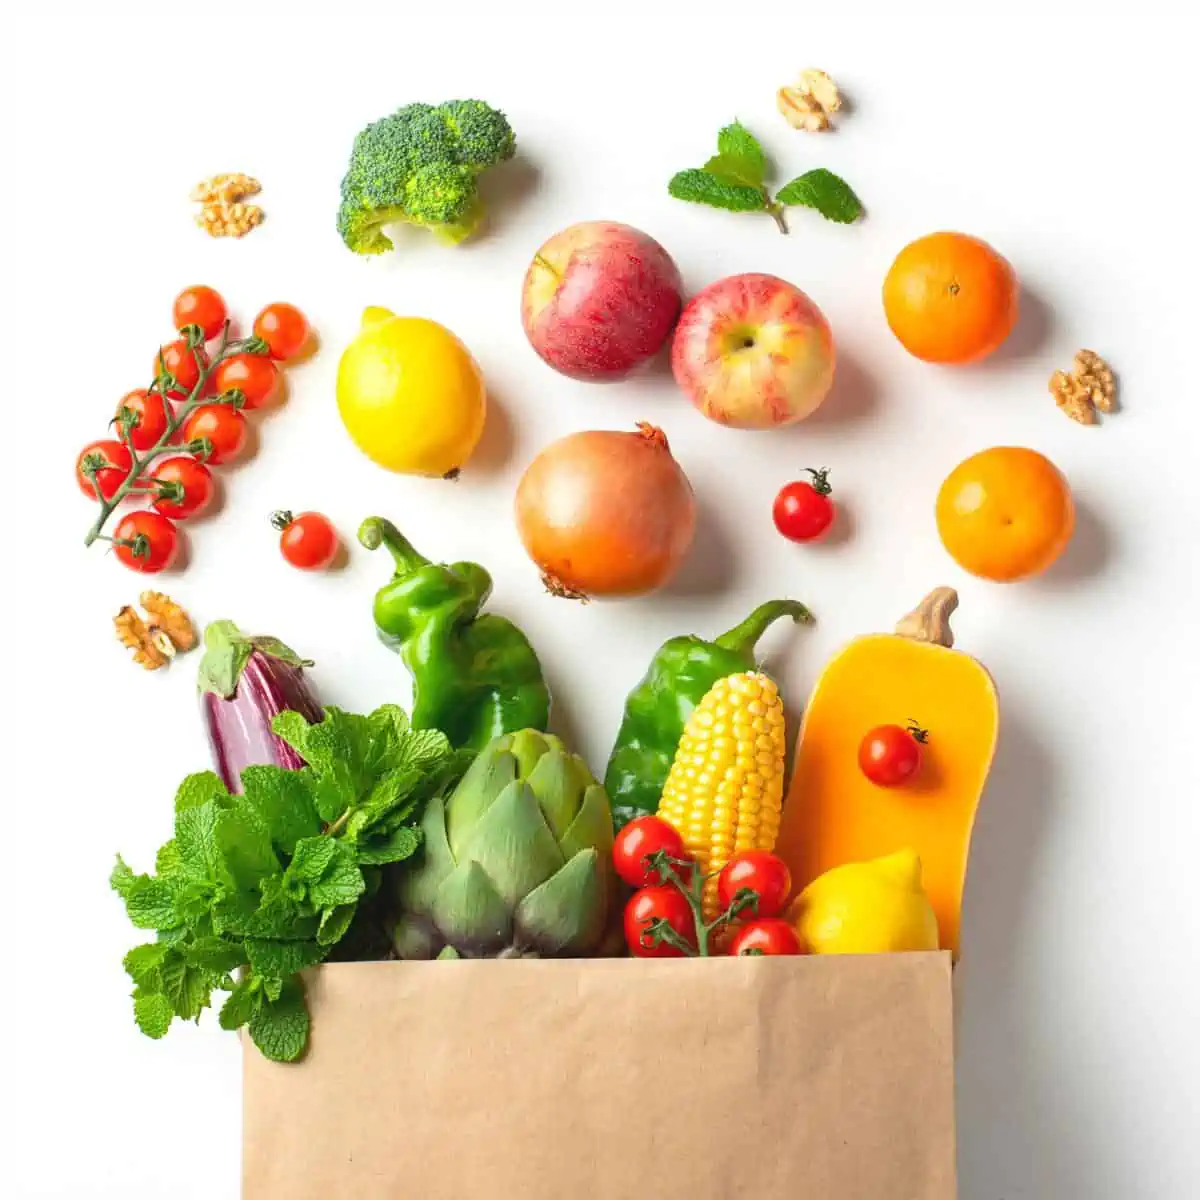 Grocery bag with going vegan essentials like fruit and veggies.